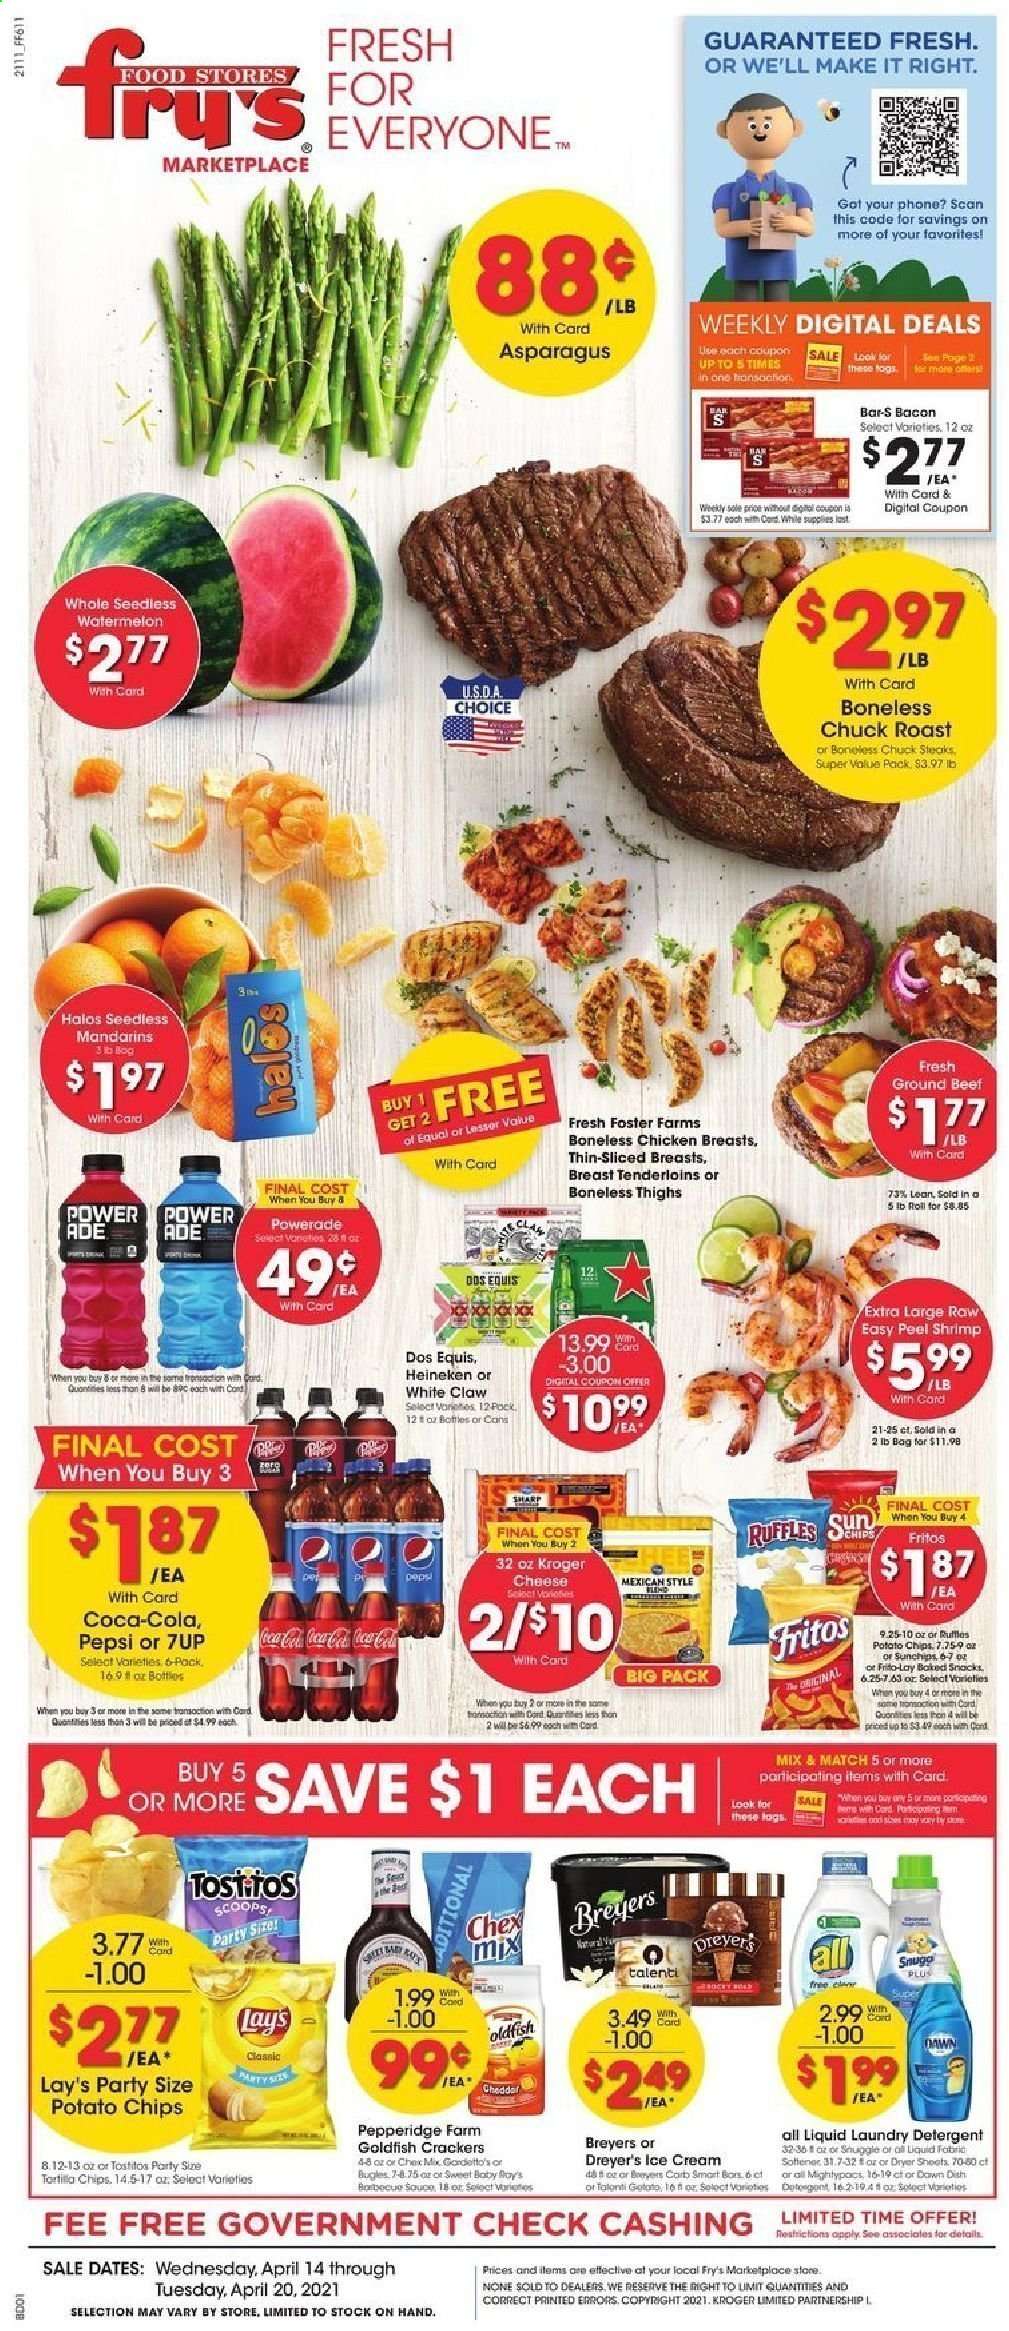 thumbnail - Fry’s Flyer - 04/14/2021 - 04/20/2021 - Sales products - asparagus, mandarines, watermelon, shrimps, bacon, cheese, ice cream, Talenti Gelato, snack, crackers, Fritos, tortilla chips, potato chips, chips, Lay’s, Goldfish, Frito-Lay, Ruffles, Tostitos, Chex Mix, Coca-Cola, Powerade, Pepsi, 7UP, White Claw, beer, Dos Equis, Heineken, chicken breasts, beef meat, ground beef, steak, chuck roast, detergent, fabric softener, laundry detergent, dryer sheets. Page 1.